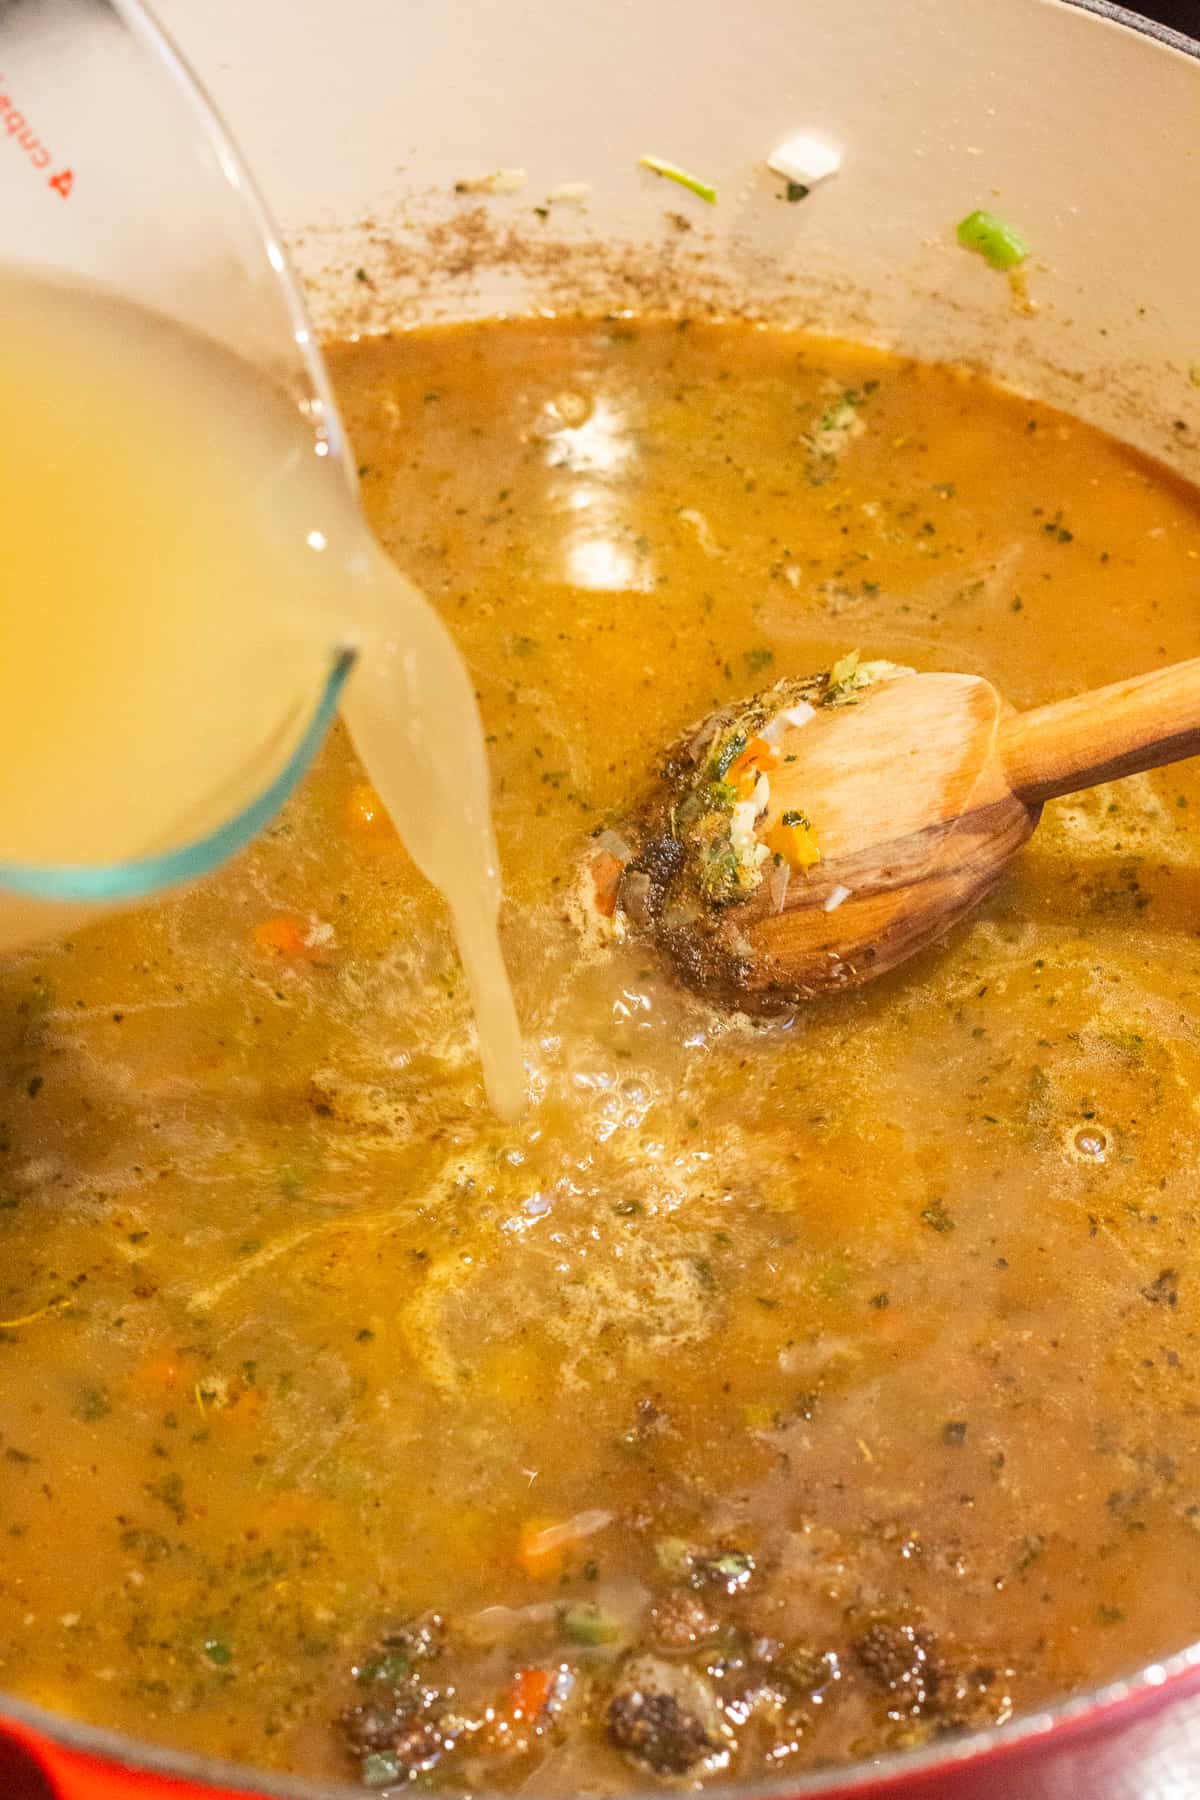 Chicken broth being poured into a large pot with cooked vegetables and spices already in it.